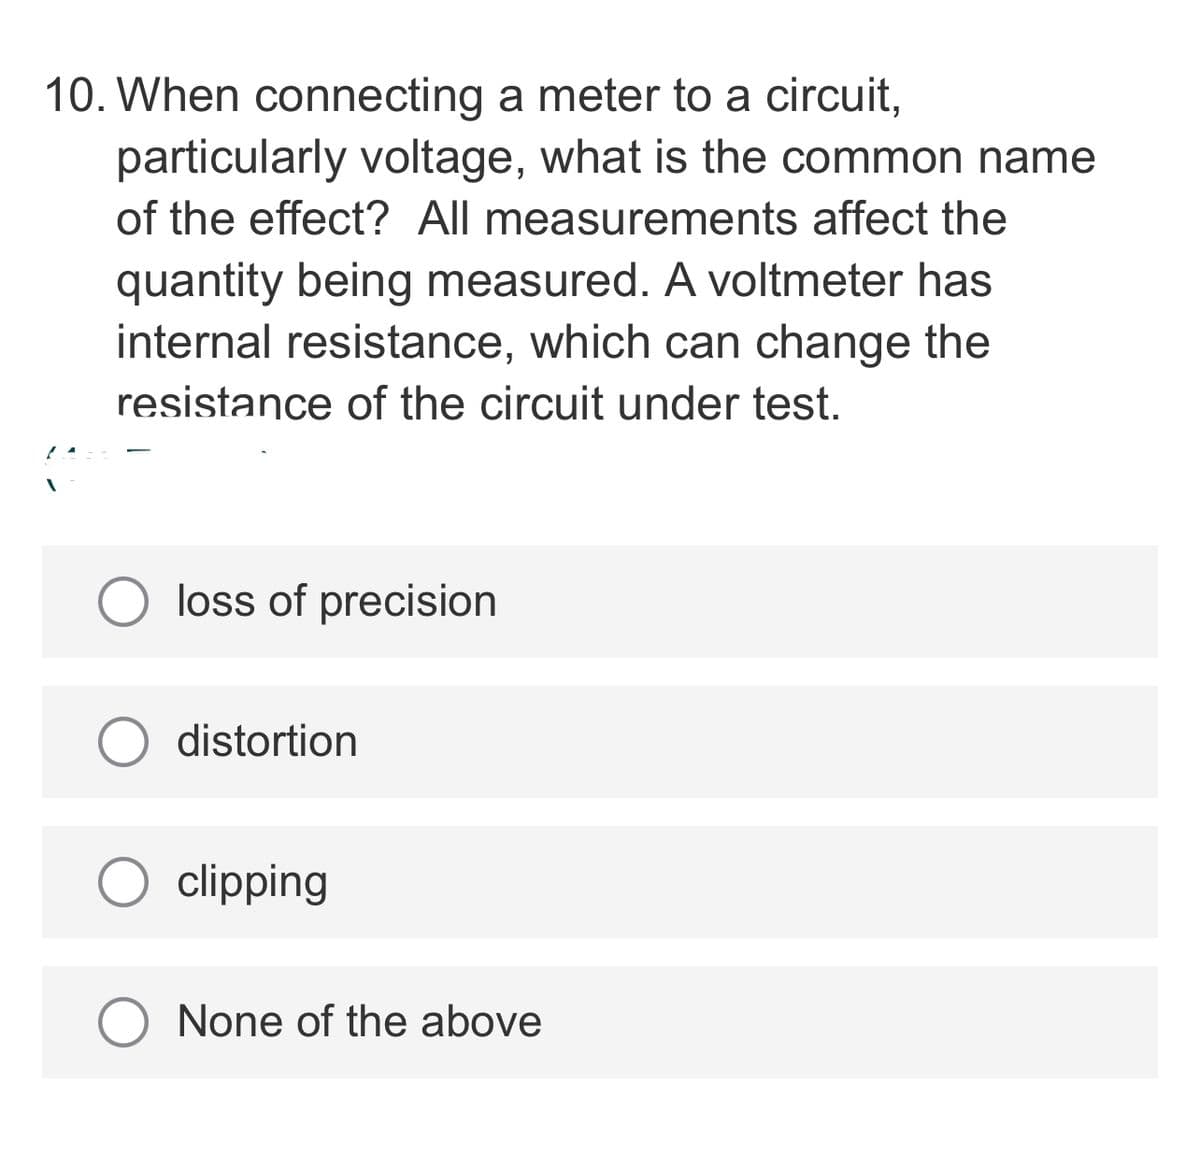 10. When connecting a meter to a circuit,
particularly voltage, what is the common name
of the effect? All measurements affect the
quantity being measured. A voltmeter has
internal resistance, which can change the
resistance of the circuit under test.
loss of precision
distortion
clipping
O None of the above
